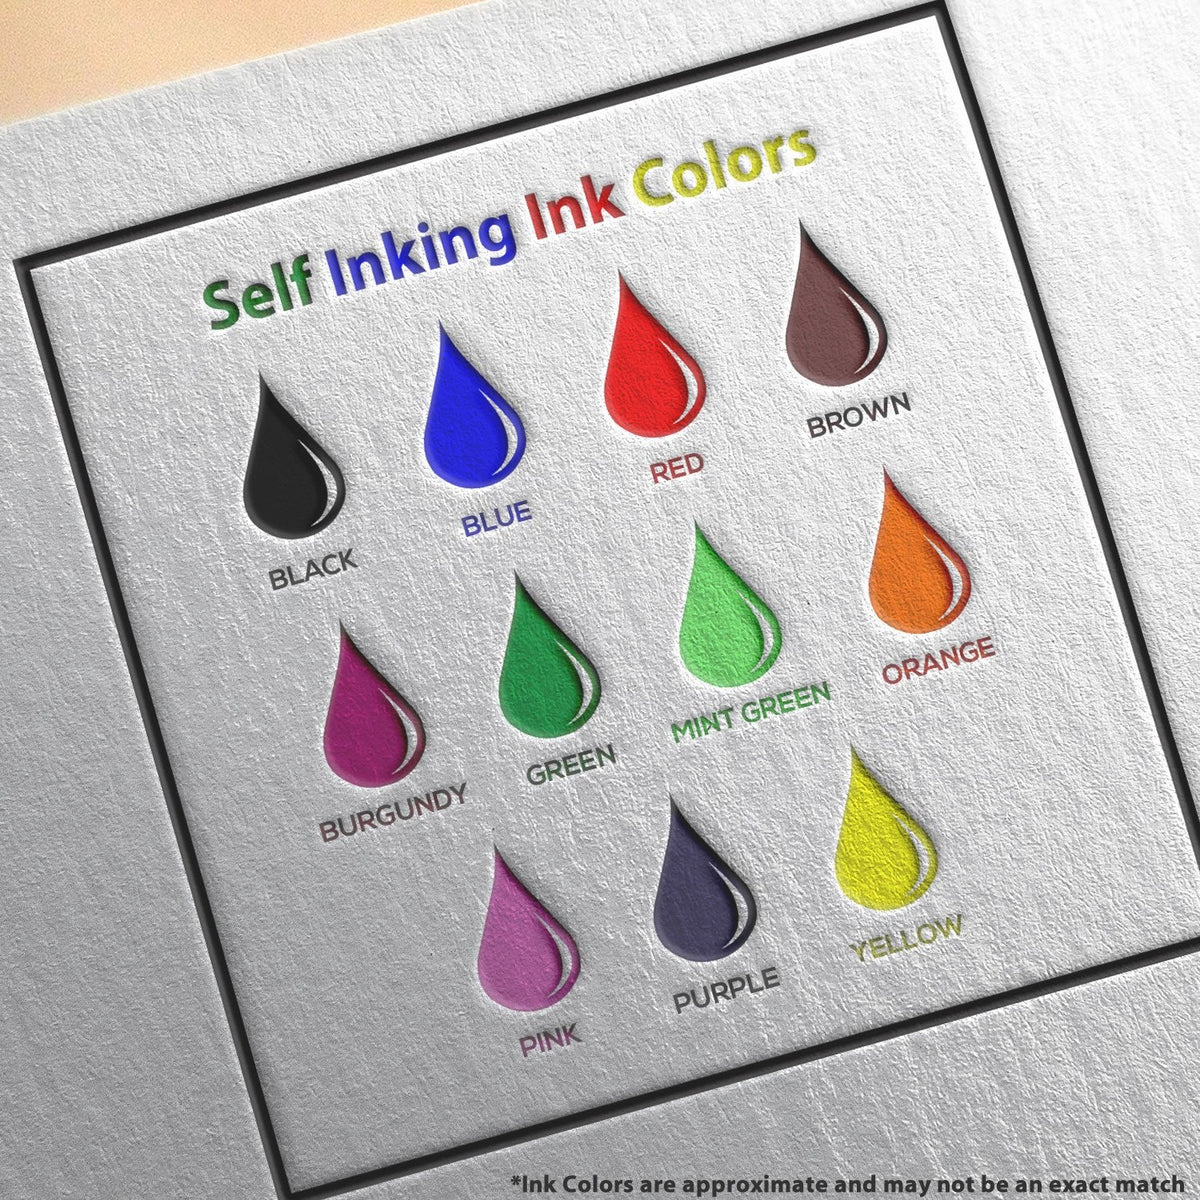 Self-Inking Paid with Date Line Stamp Ink Color Options